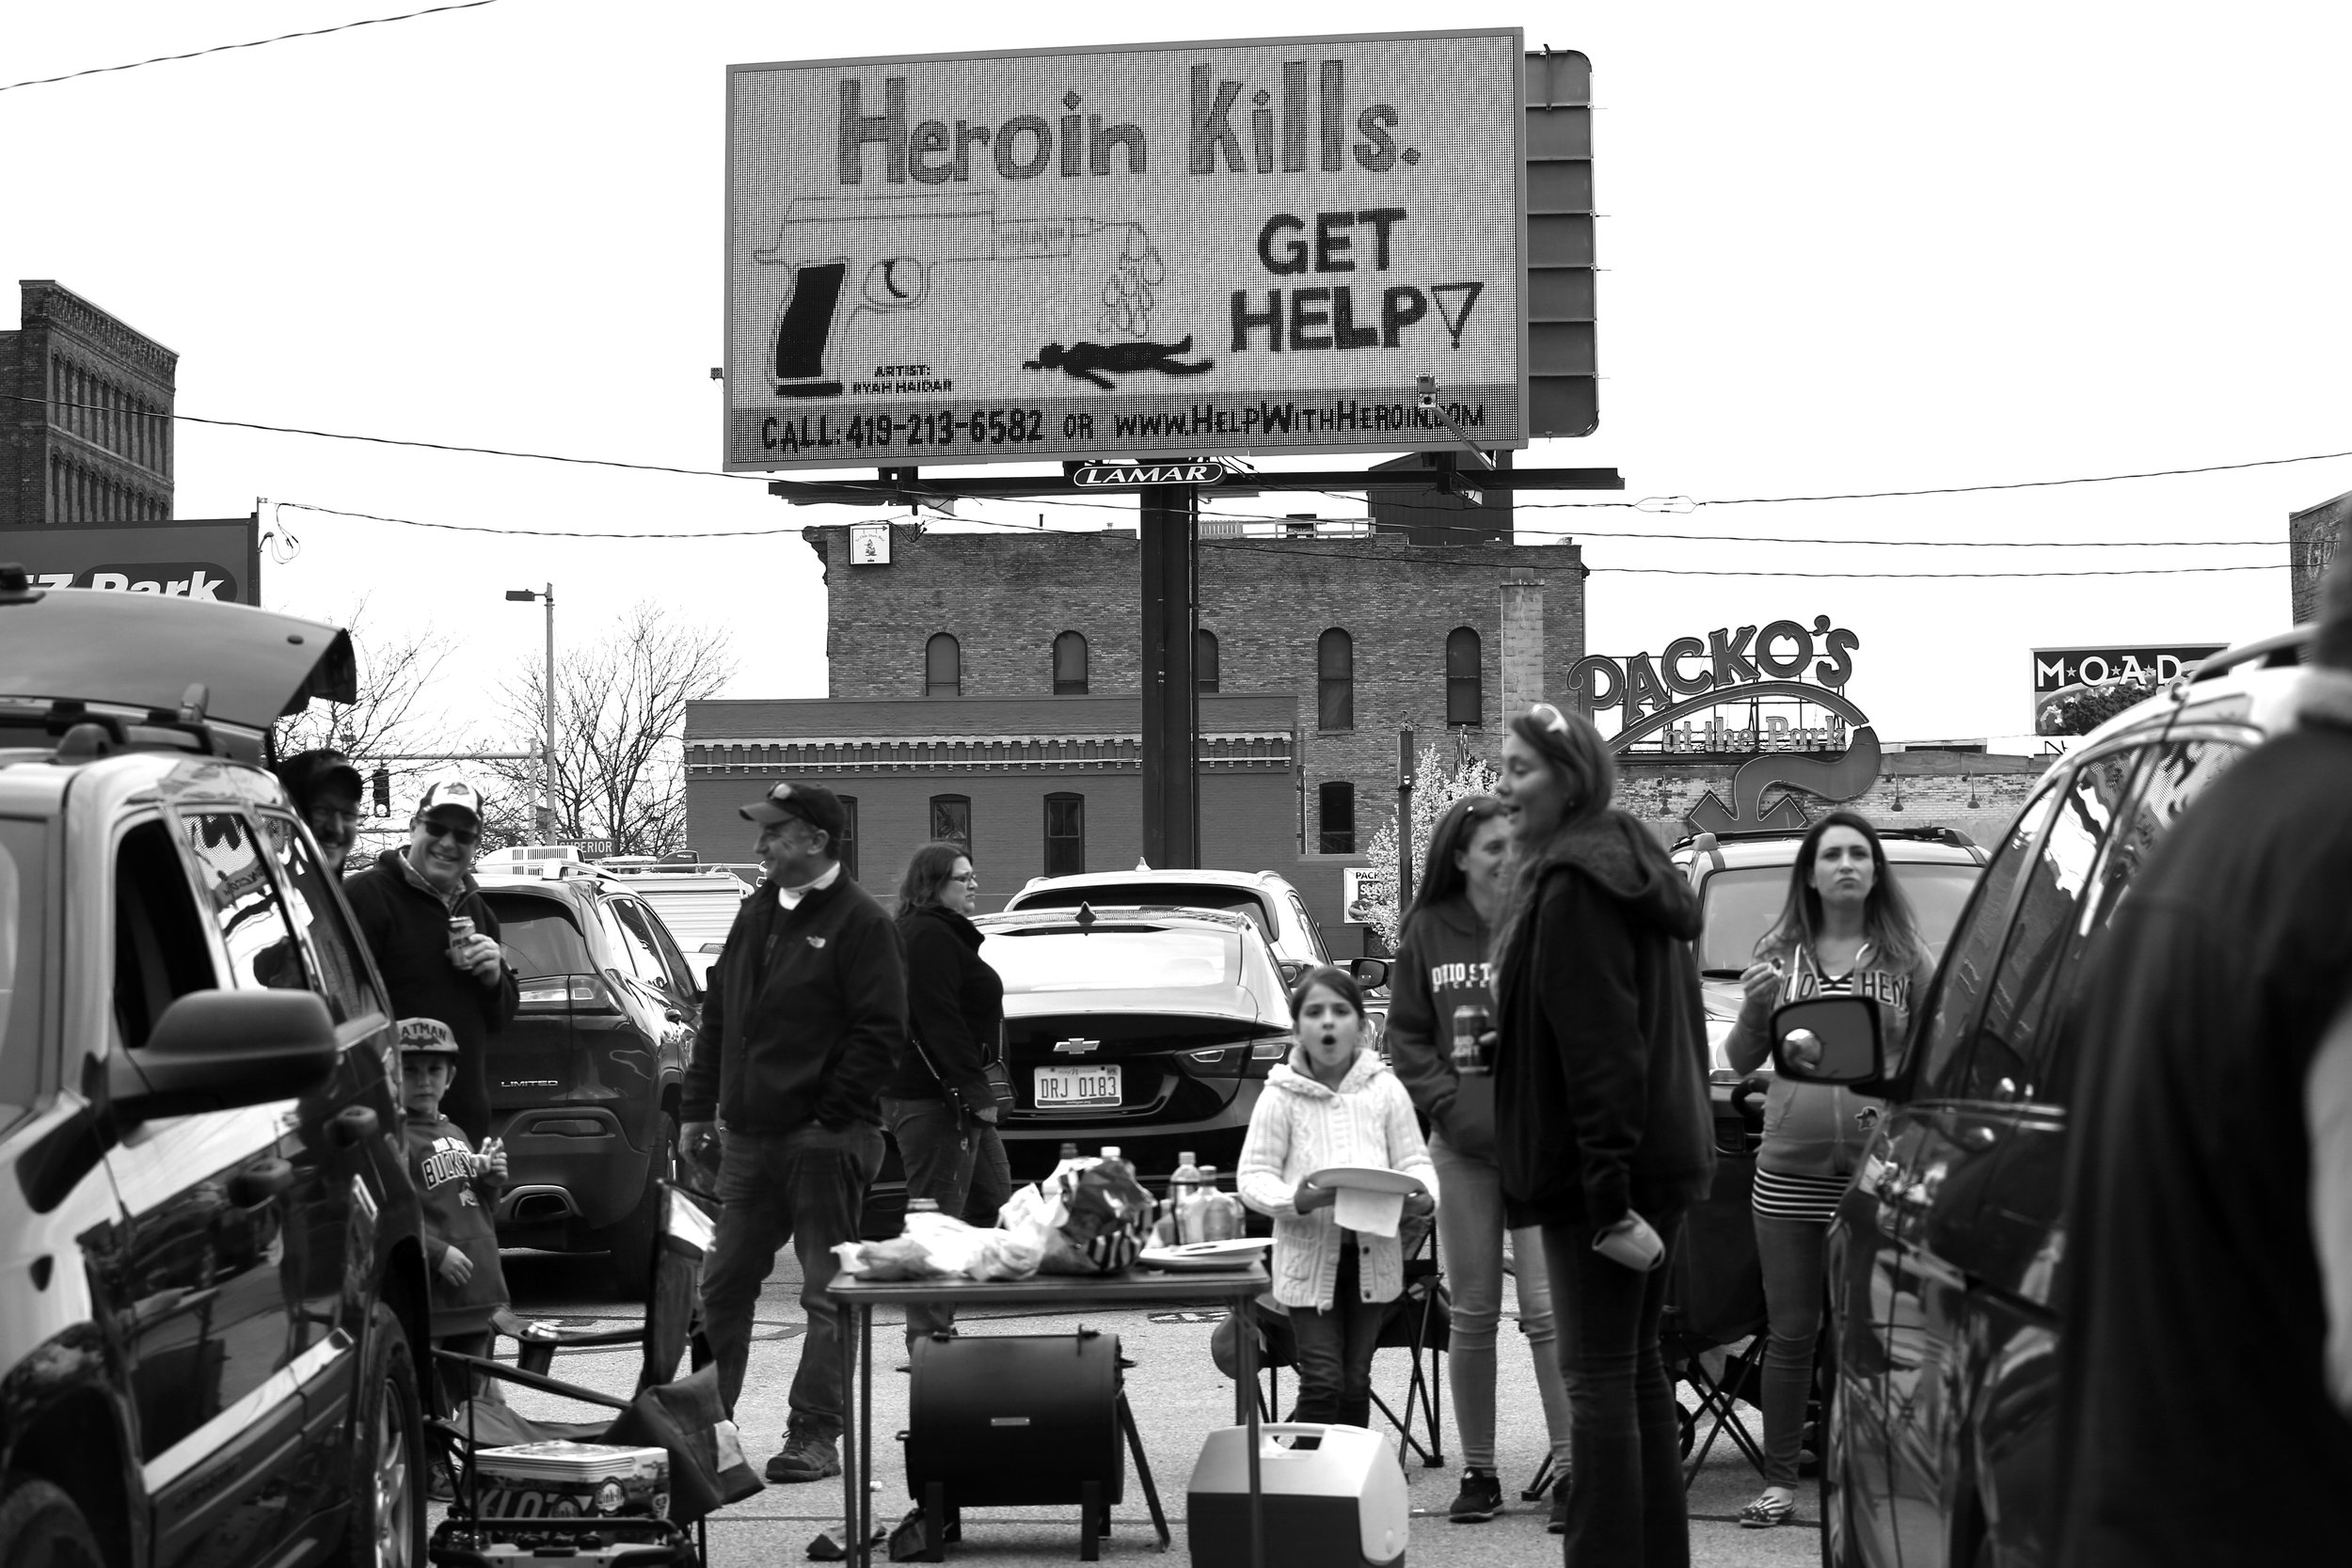  A billboard imploring addicts to seek treatment overshadows tailgaters having a cook-out at Fifth Third Field in downtown Toledo, Ohio, for the Opening Day of the Toledo Mud Hens baseball season on April 13, 2017. The crisis of opioid addiction impa